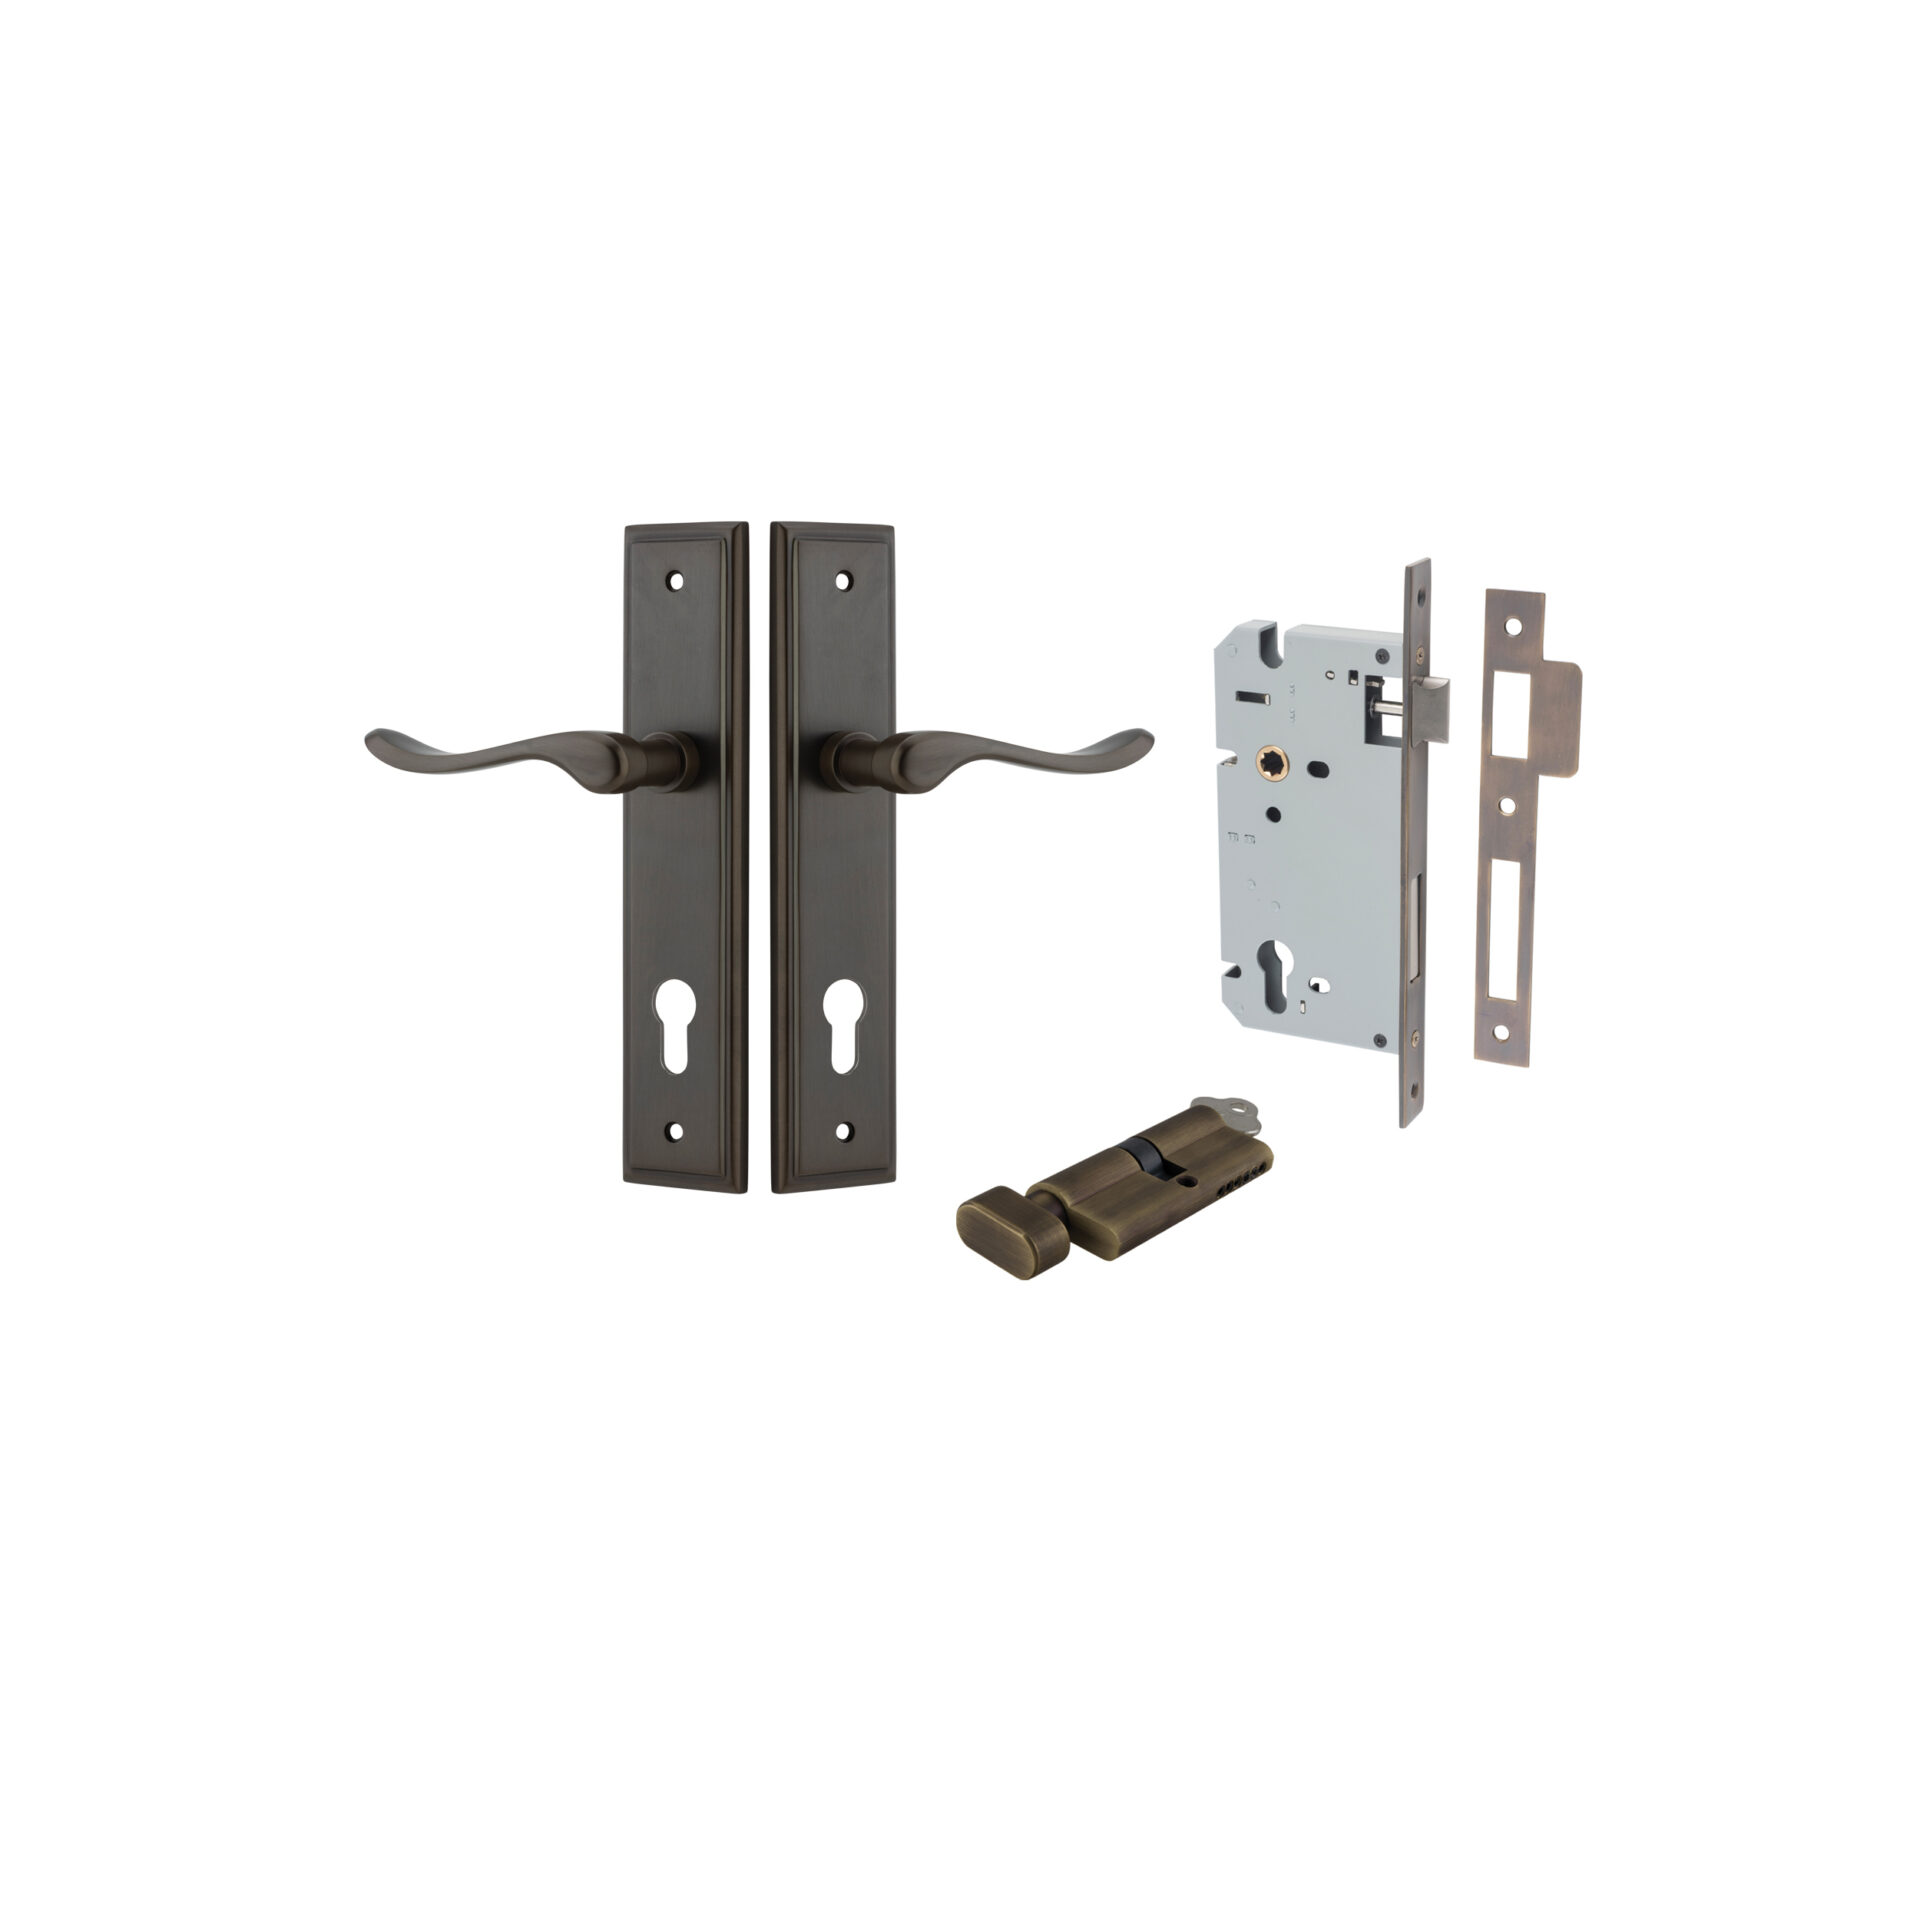 Stirling Lever - Stepped Backplate Entrance Kit with High Security Lock